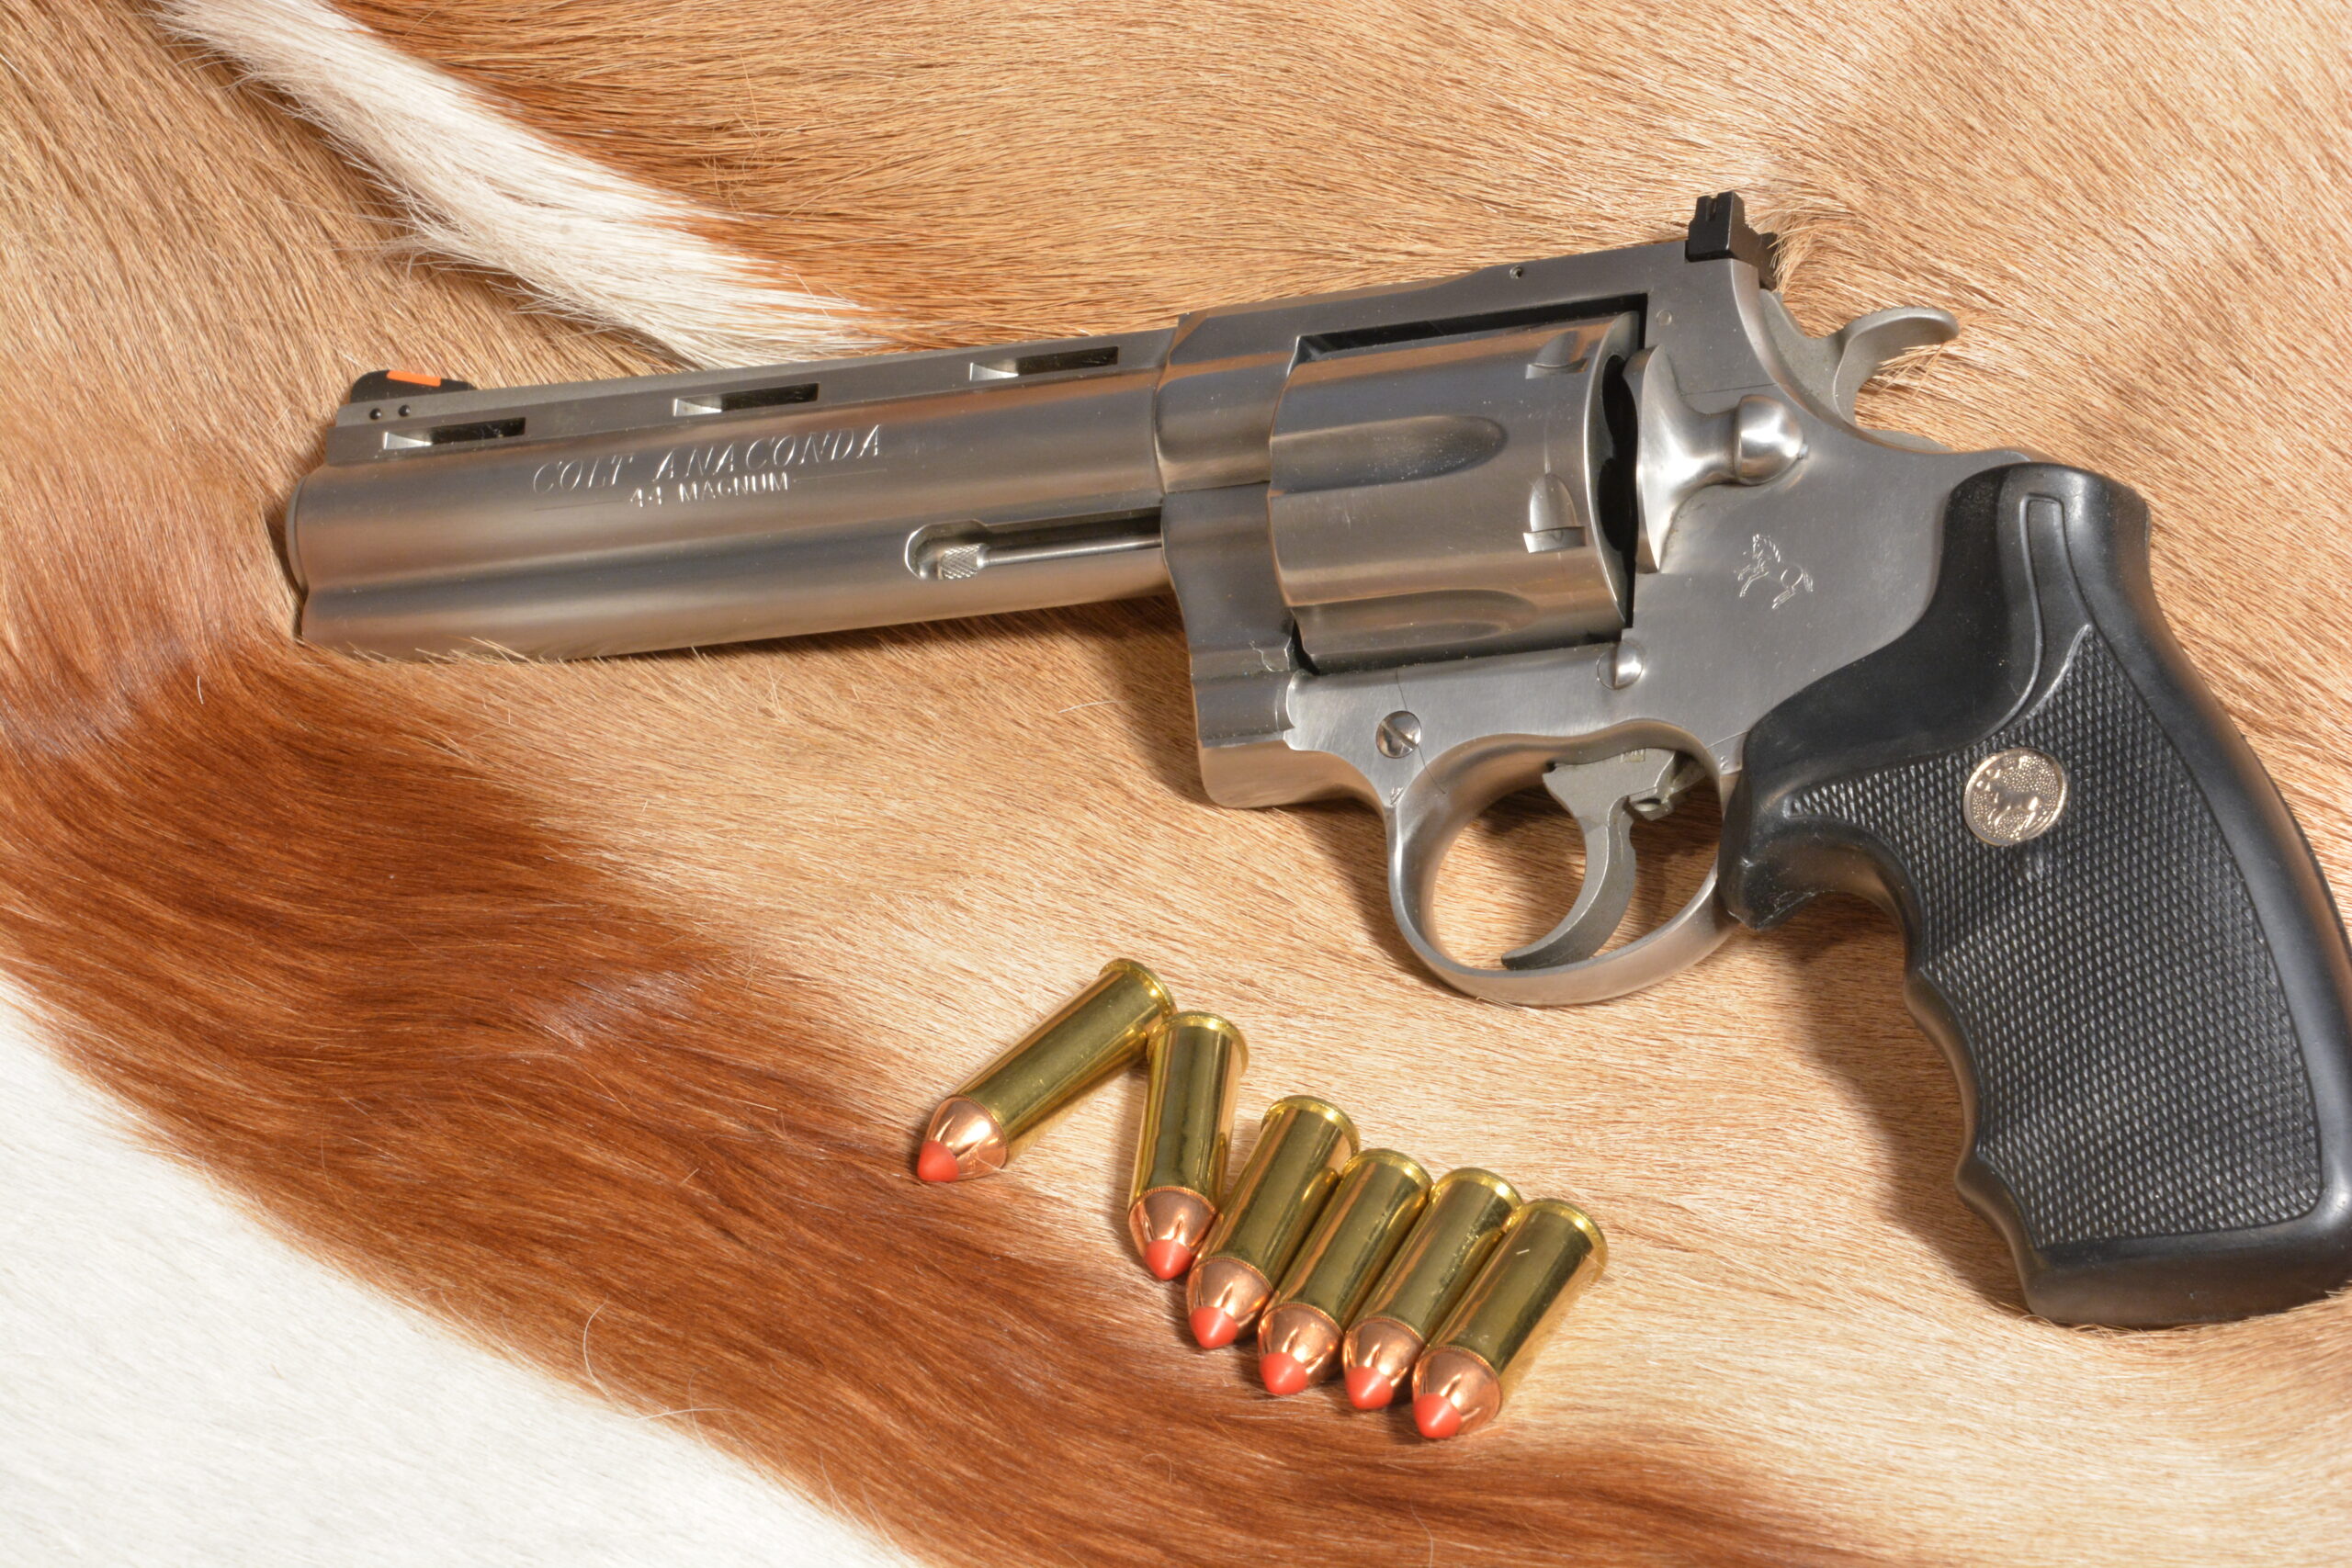 Colt Anaconda in .44 Magnum is our pick for best revolver.